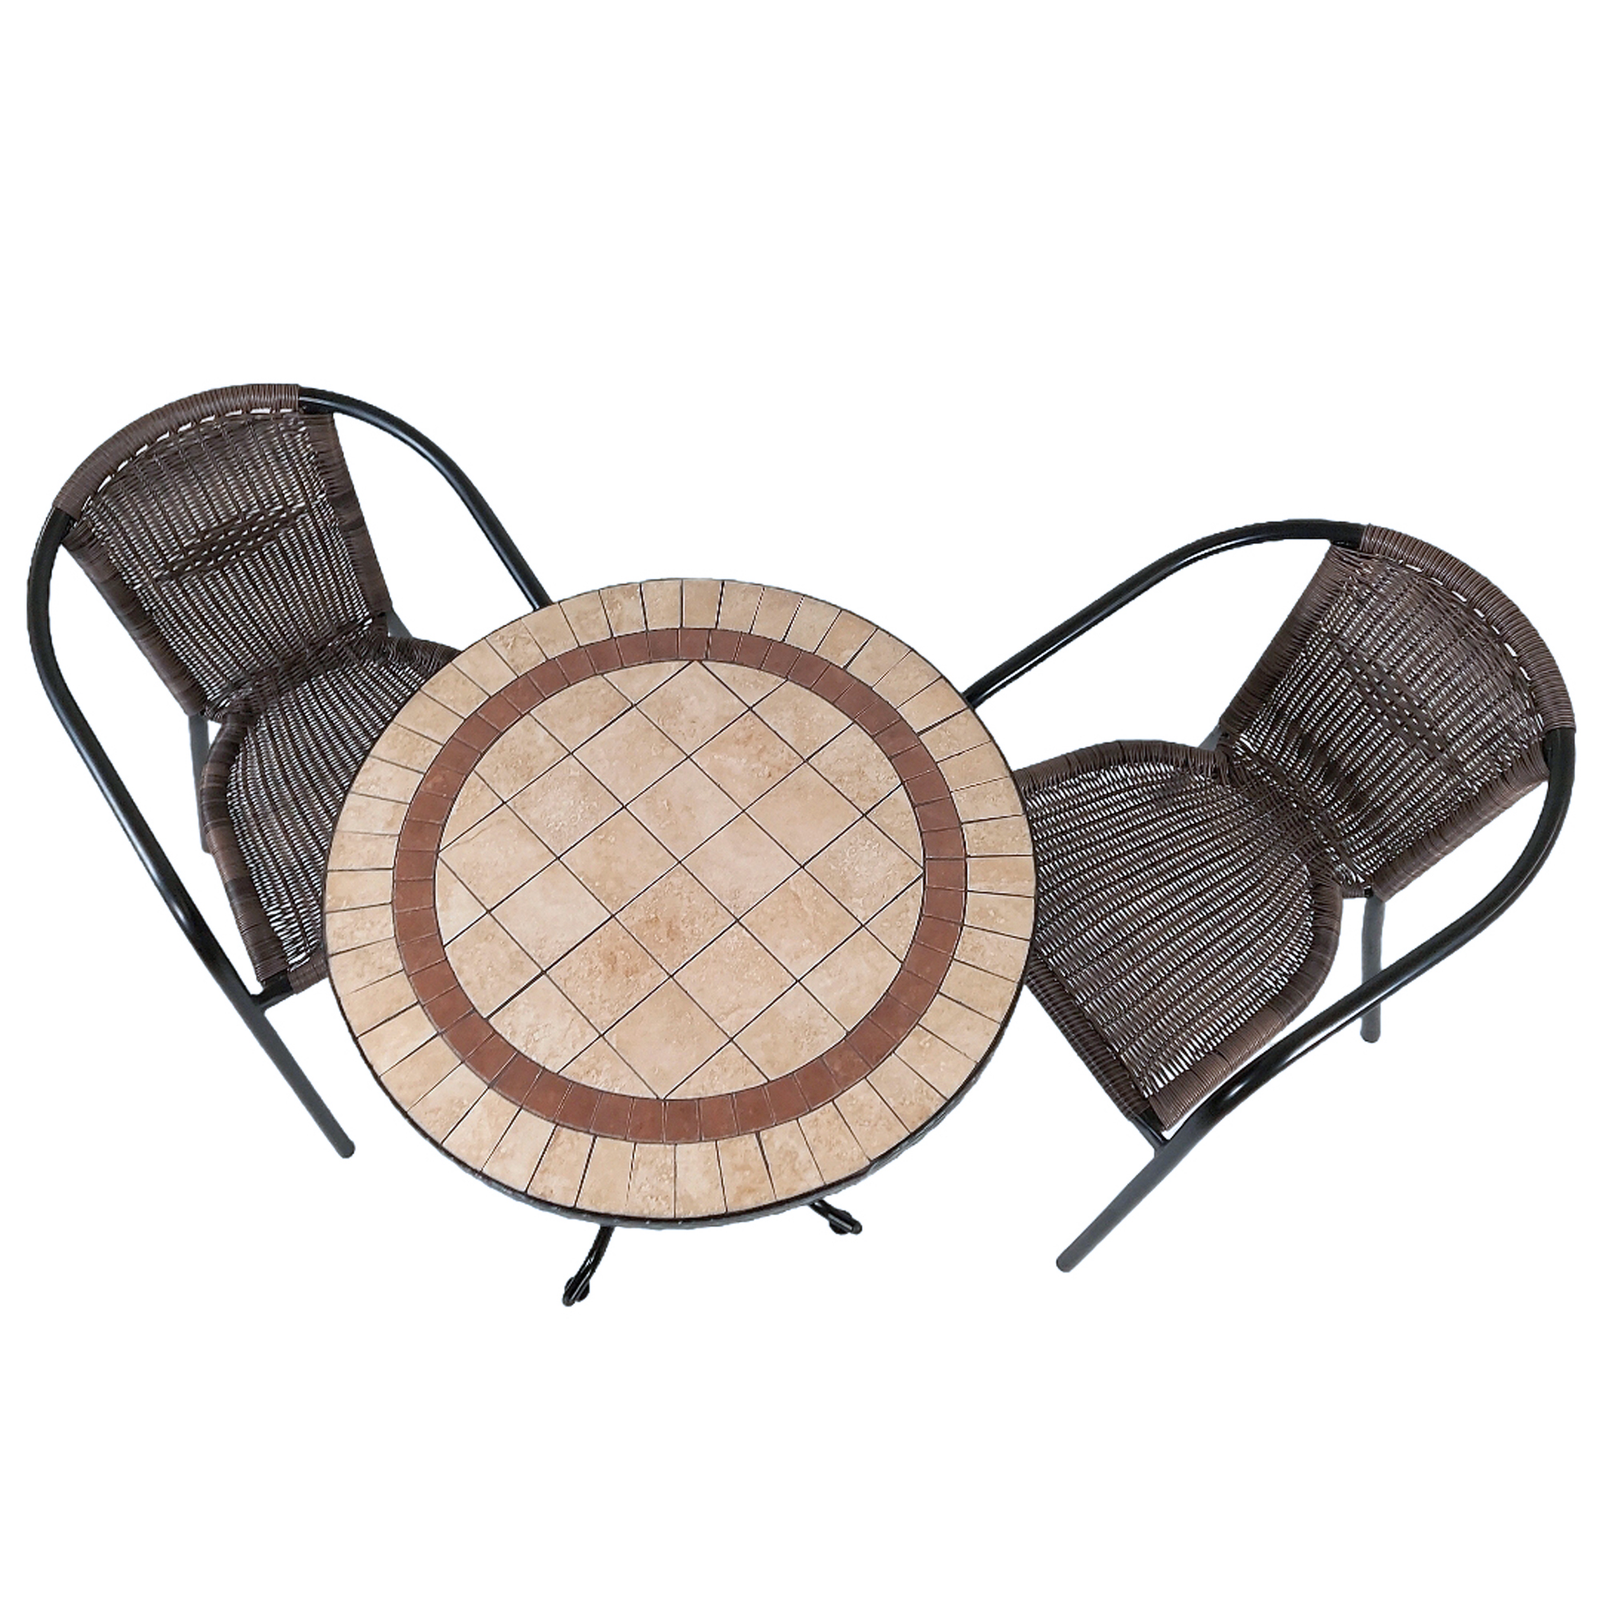 Exclusive Garden Henley 71 cm Round Table with 2 San Remo Chairs Garden Set Dining Set Dining Sets Exclusive Garden   